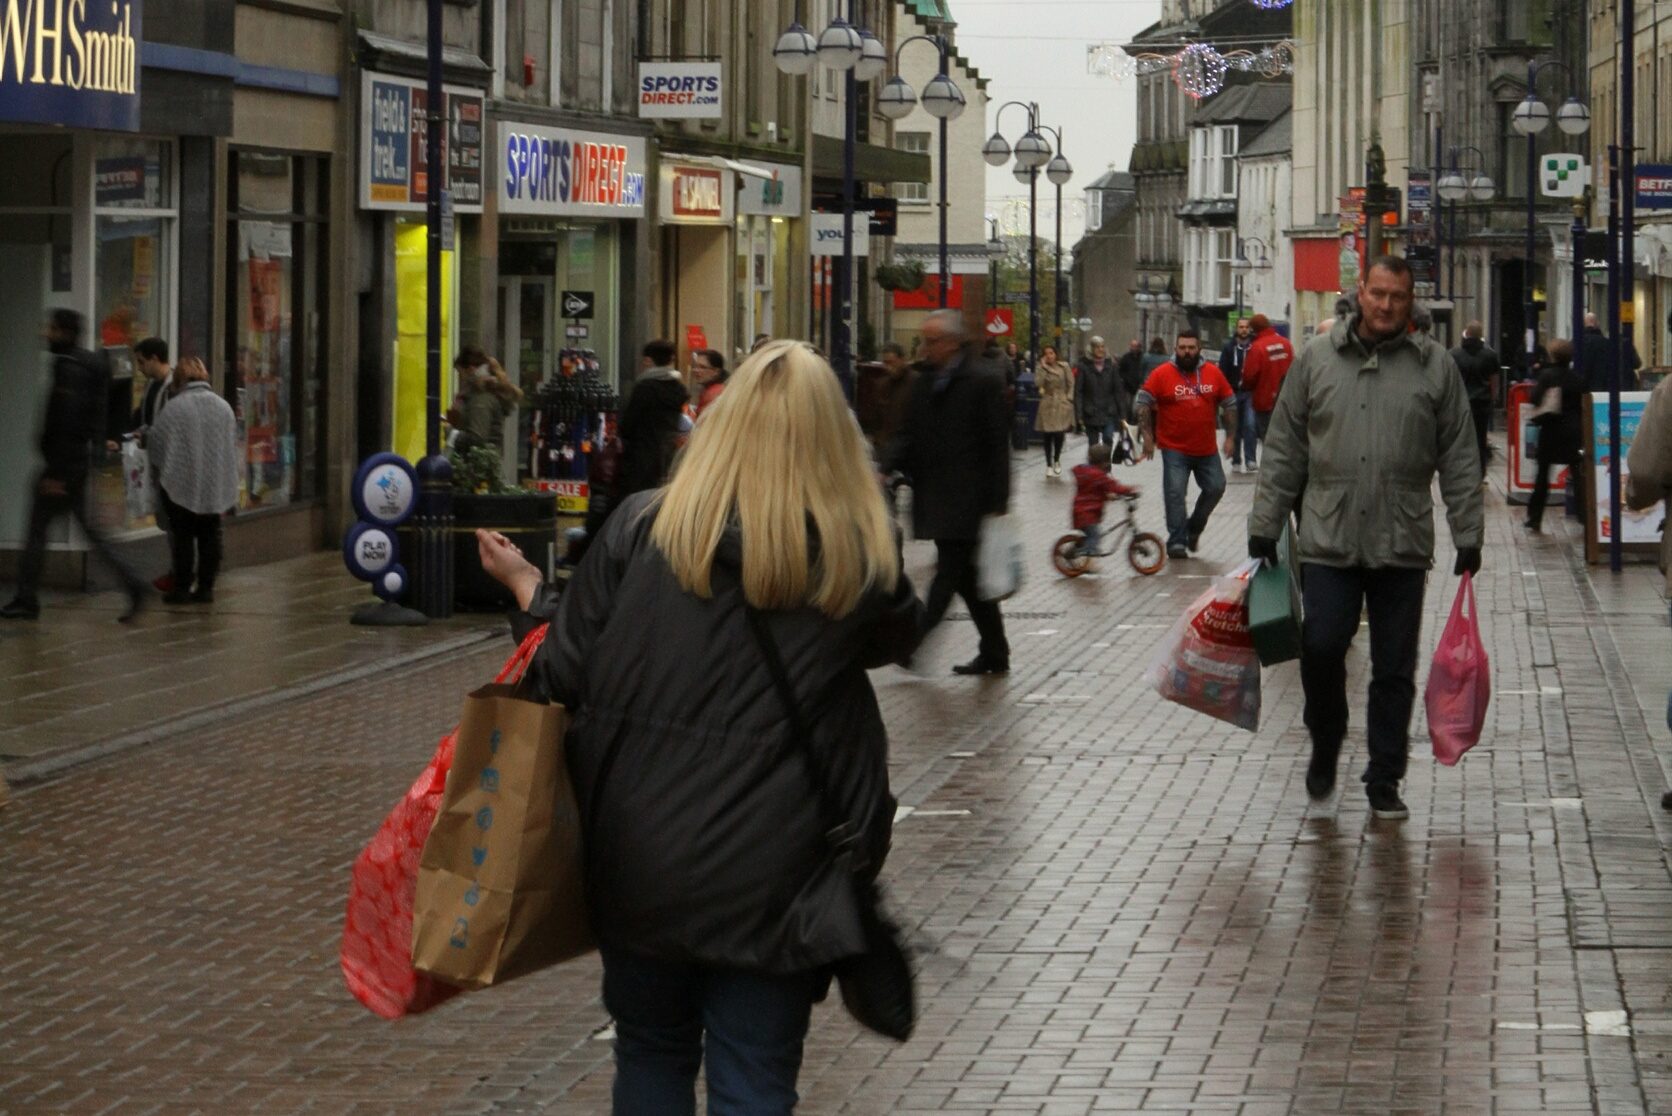 Dunfermline High Street in busier times. Street access shops will start to open from Monday.